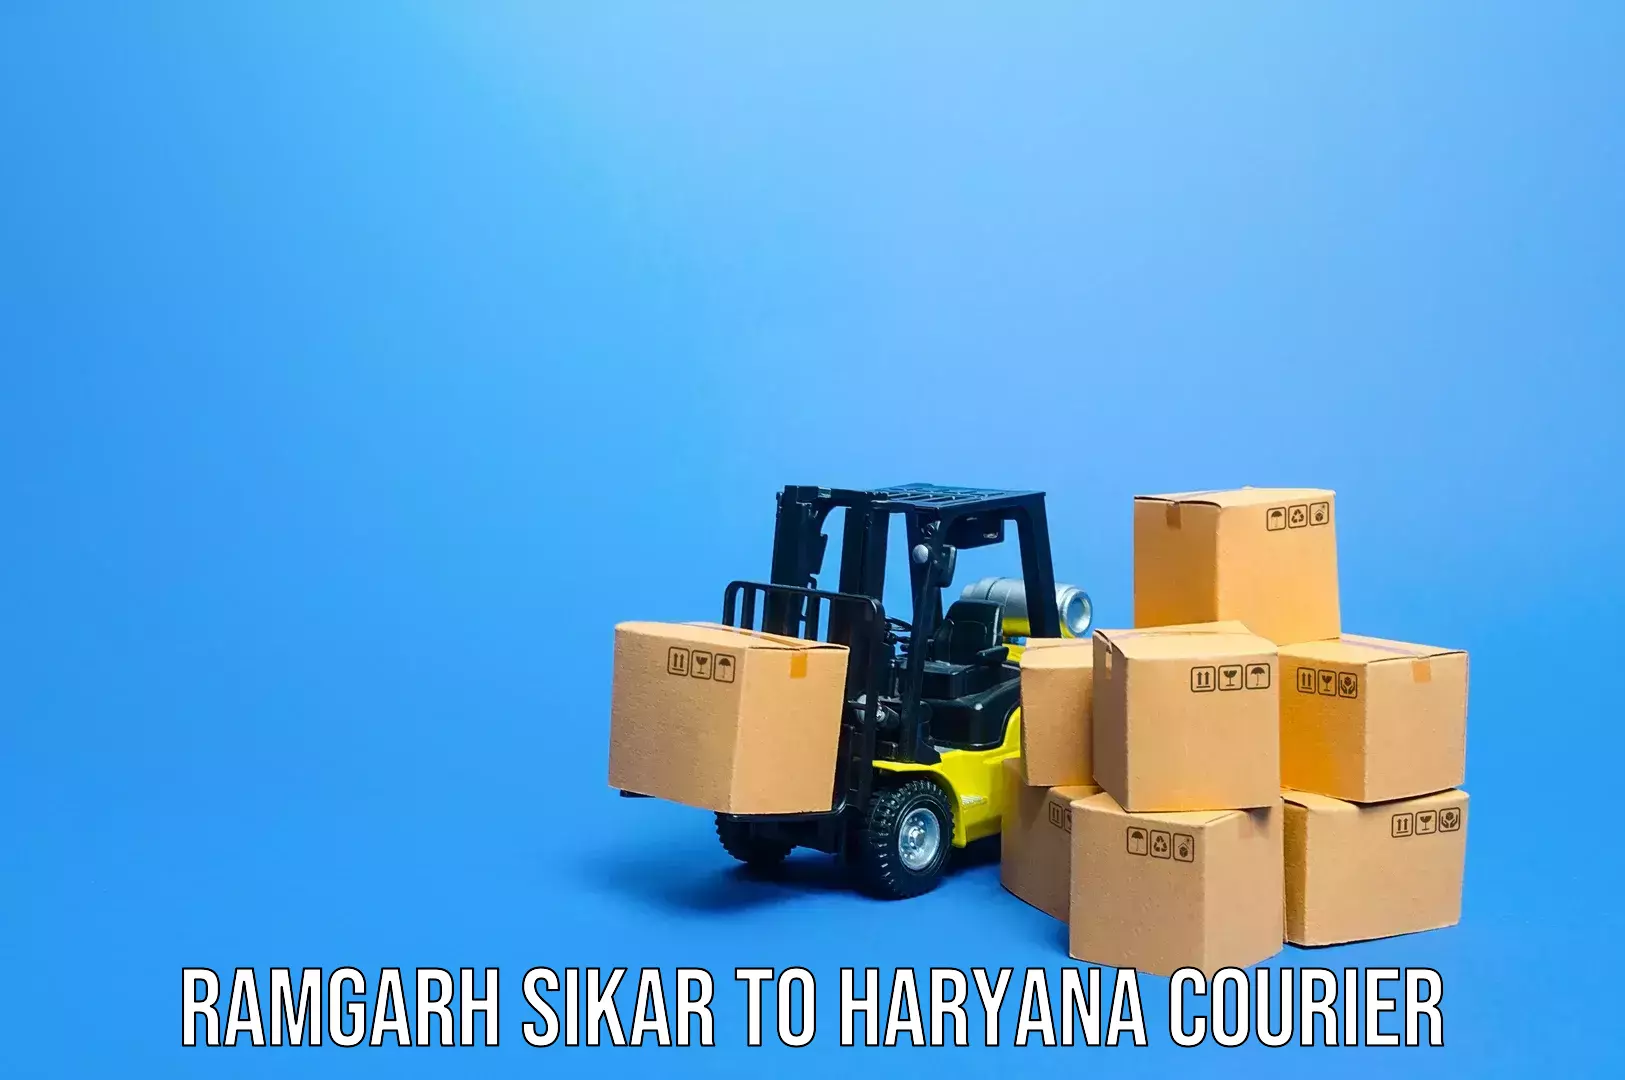 Airport luggage delivery Ramgarh Sikar to Bhiwani